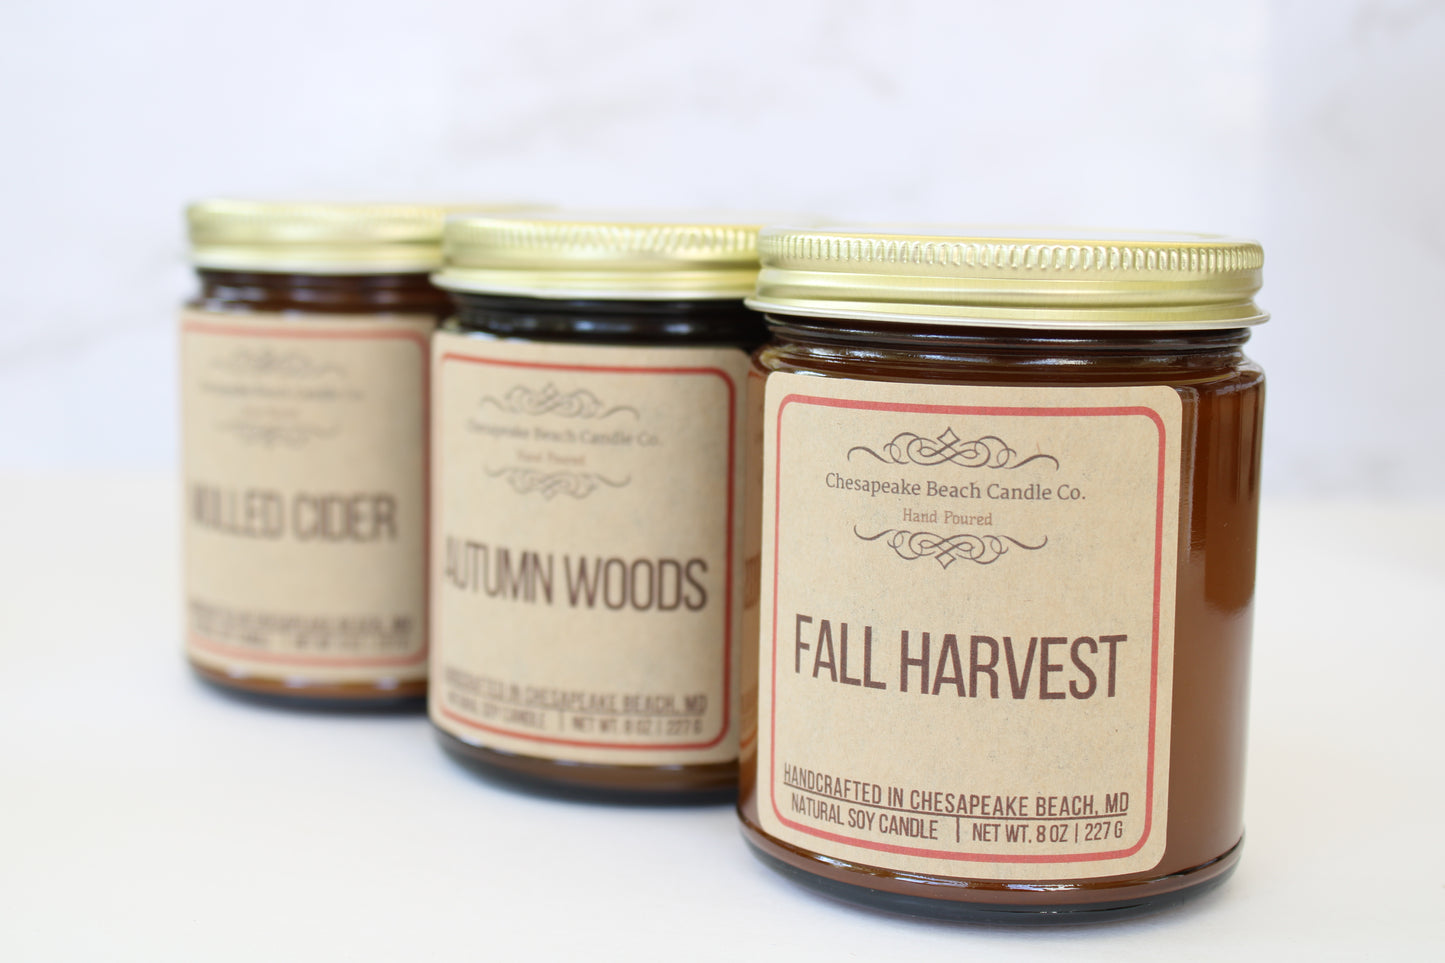 Fall Vibes Candle Trio